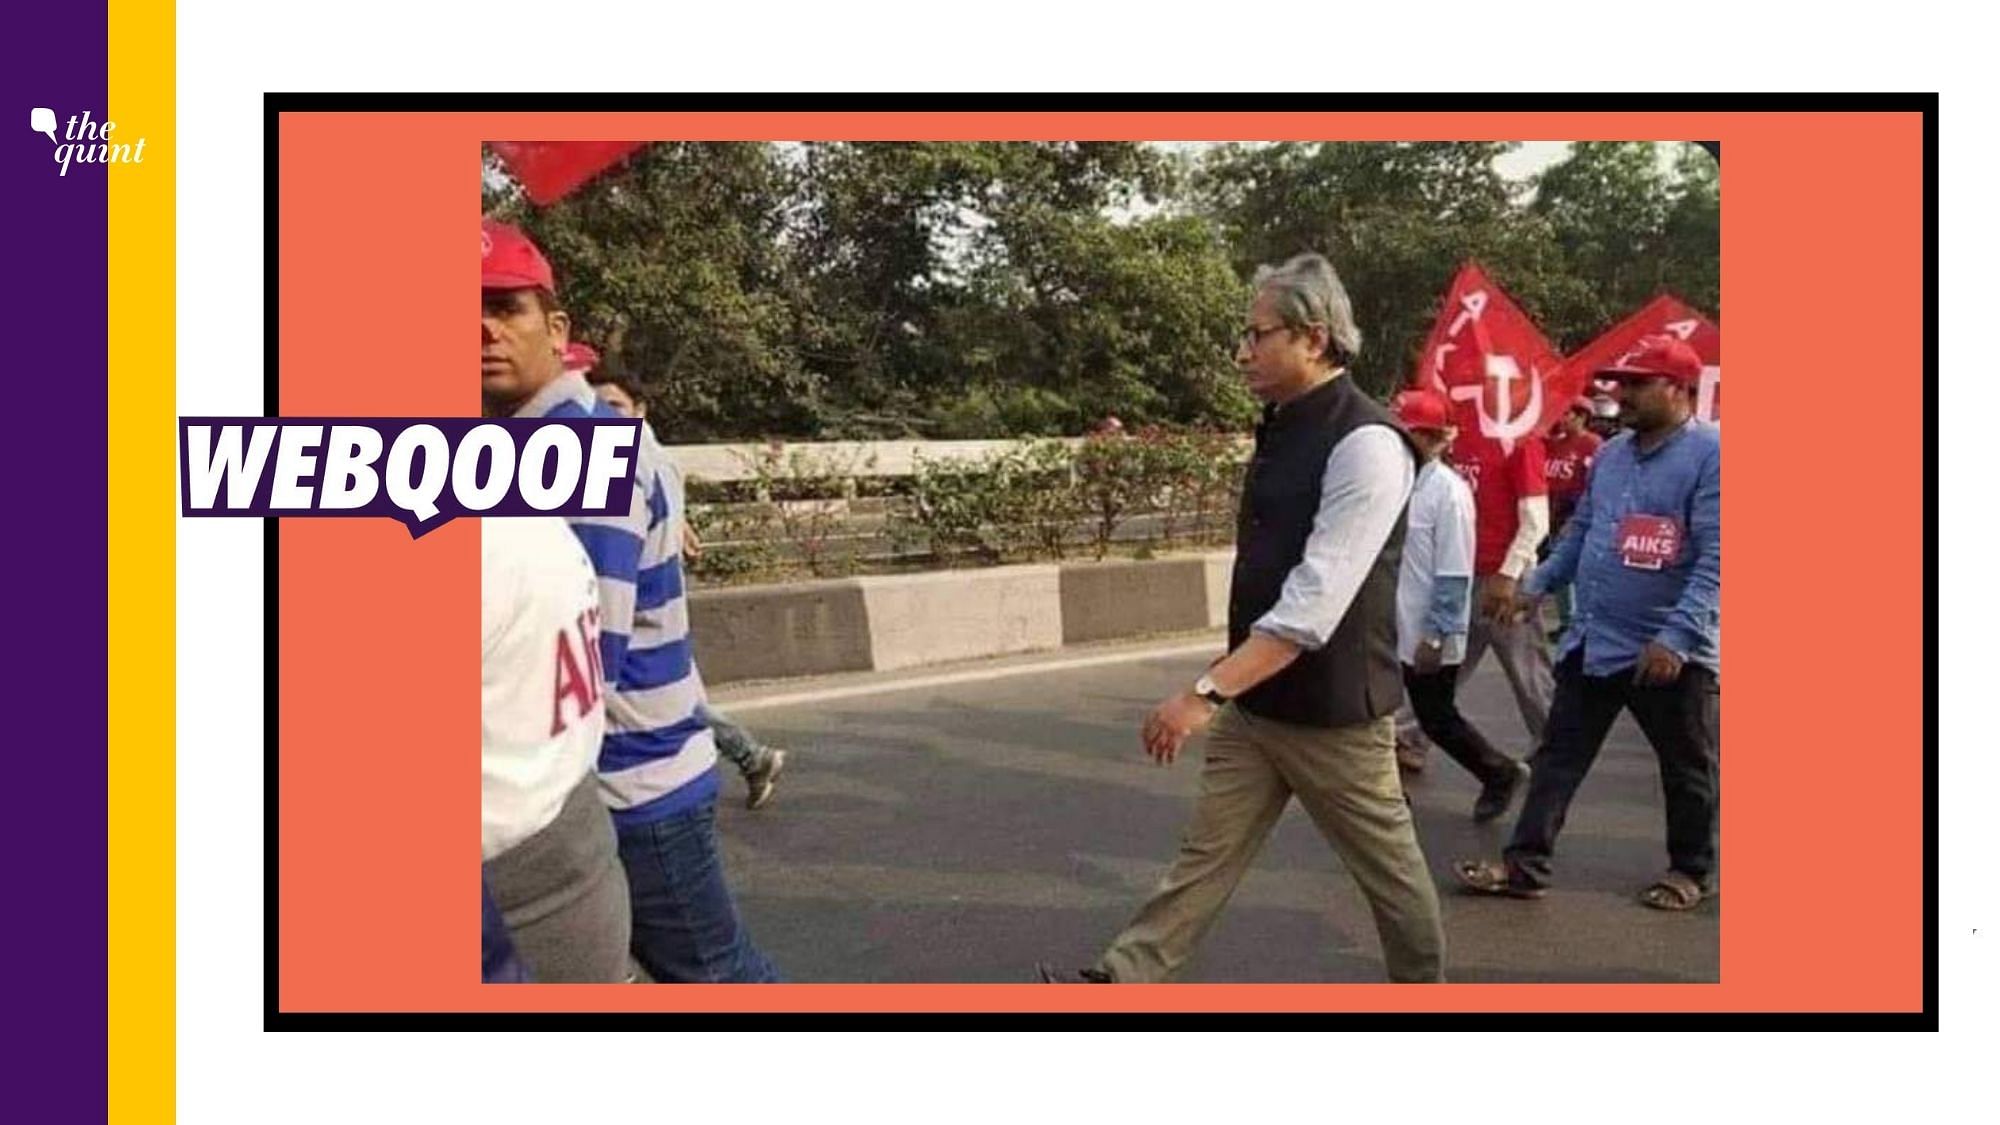 An old image of Ravish Kumar that could be traced back to 2018 has been revived in light of the ongoing farmers’ protests.